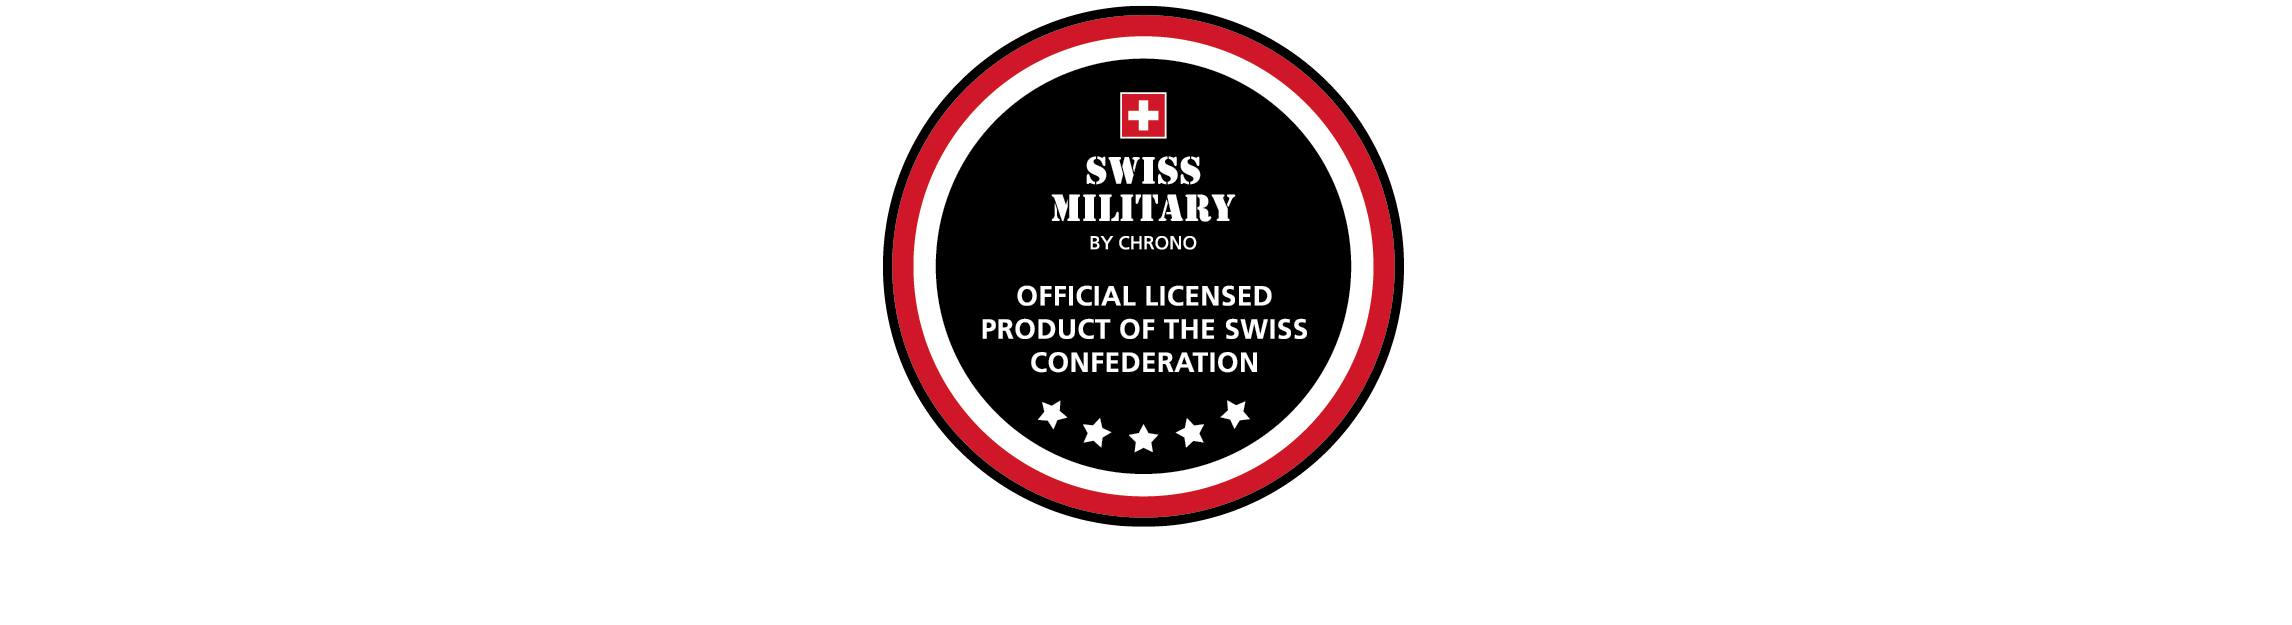 Swiss Military Official Licensed Button